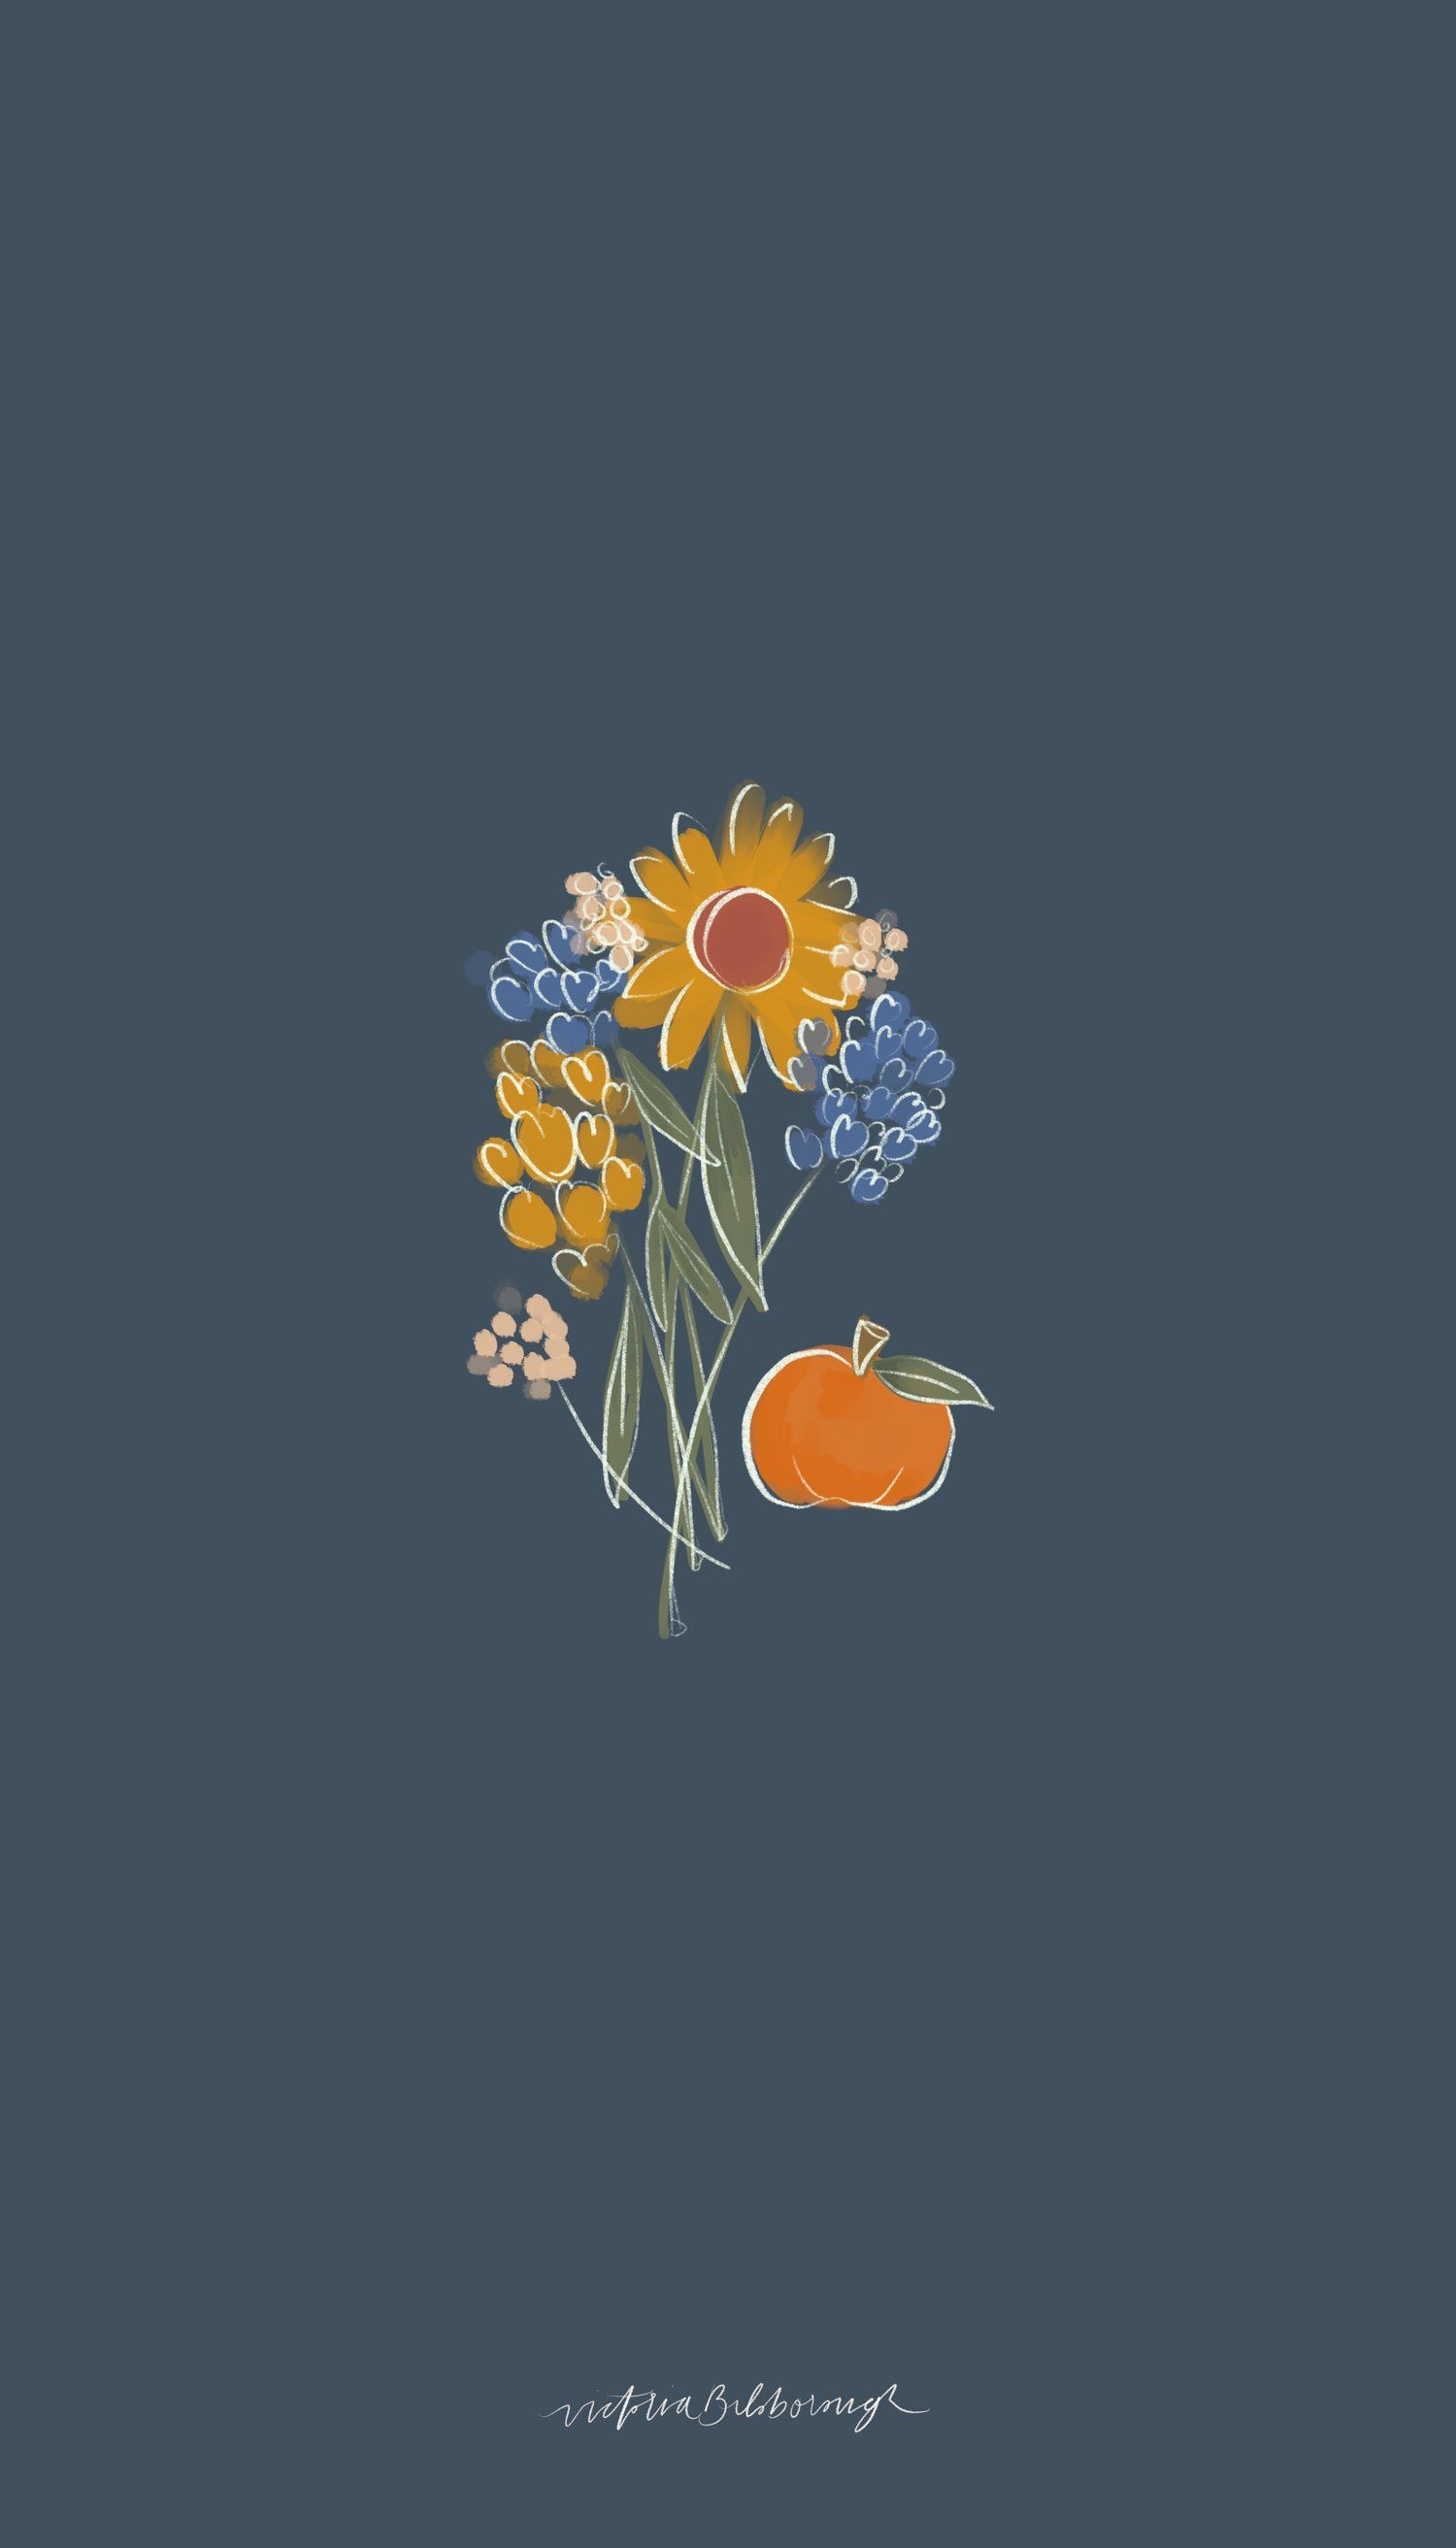 A phone wallpaper with a navy background and yellow and blue flowers and an orange pumpkin. - October